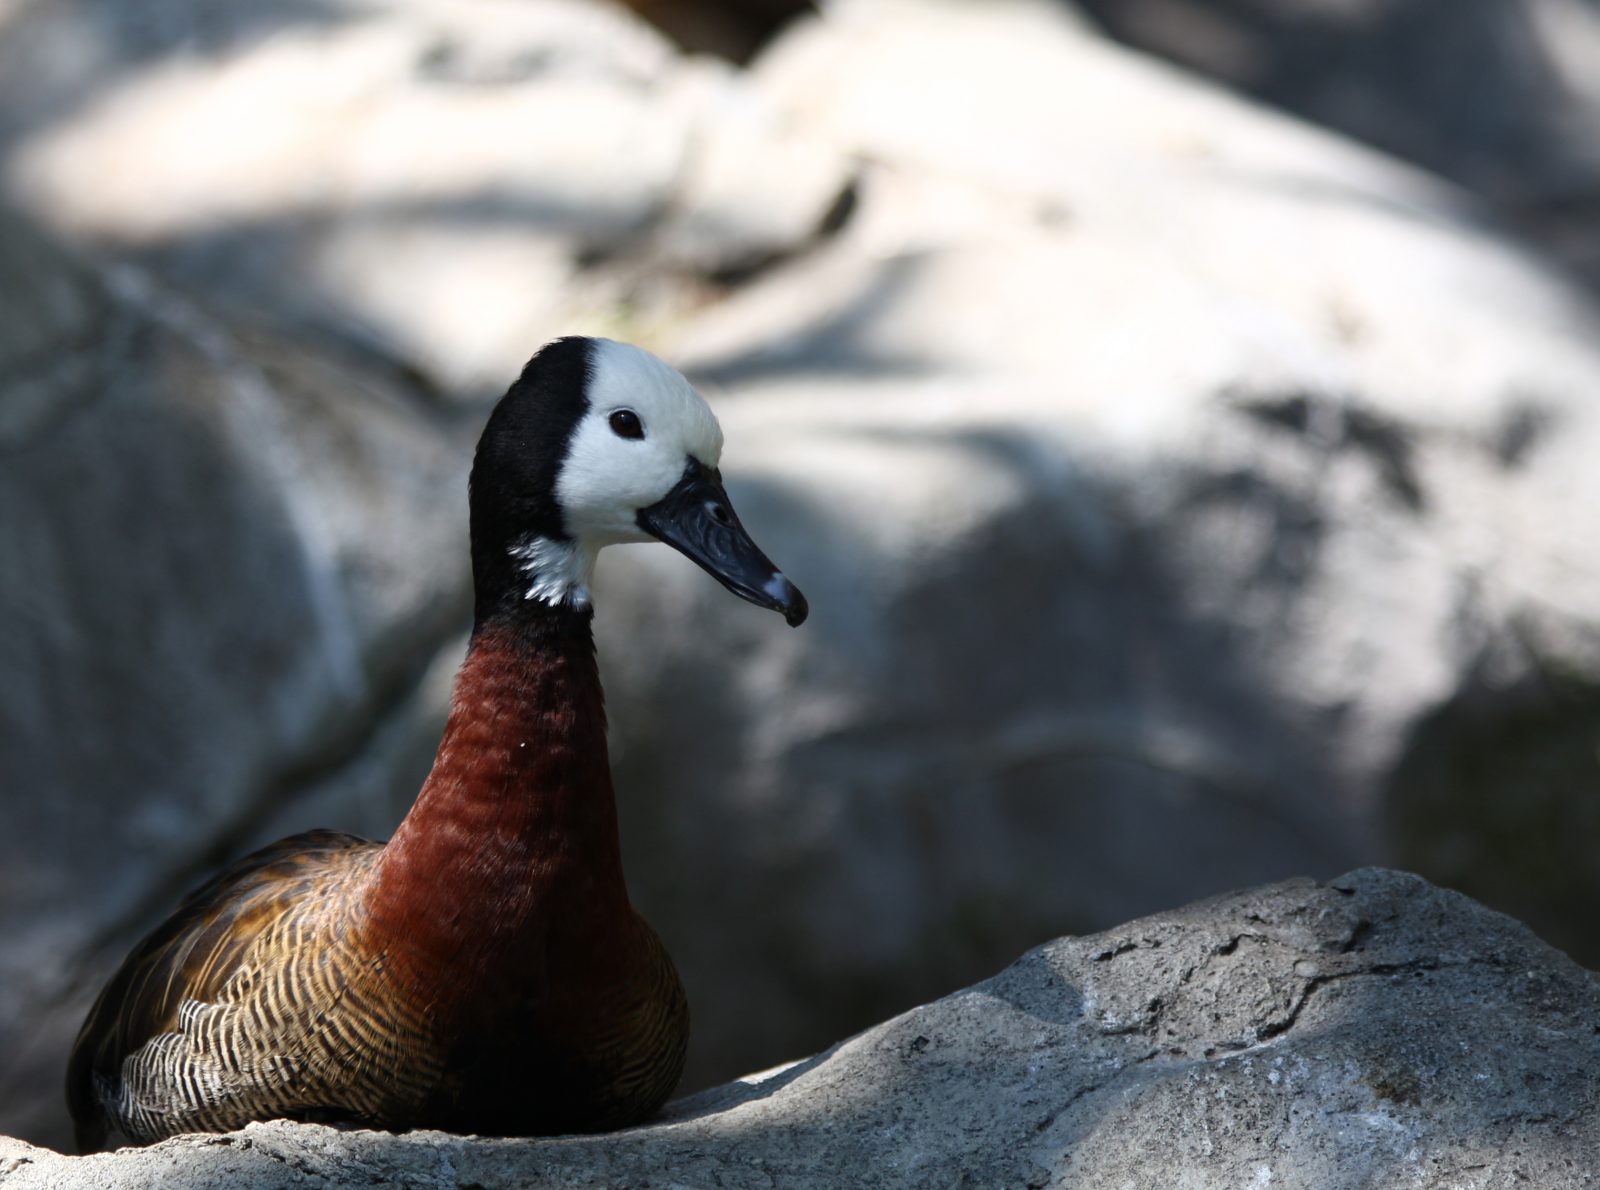 White-Faced Whistling Duck. Photo credit: Rennett Stowe. https://commons.wikimedia.org/wiki/File:White-Faced_Whistling_Duck_(3337832001).jpg